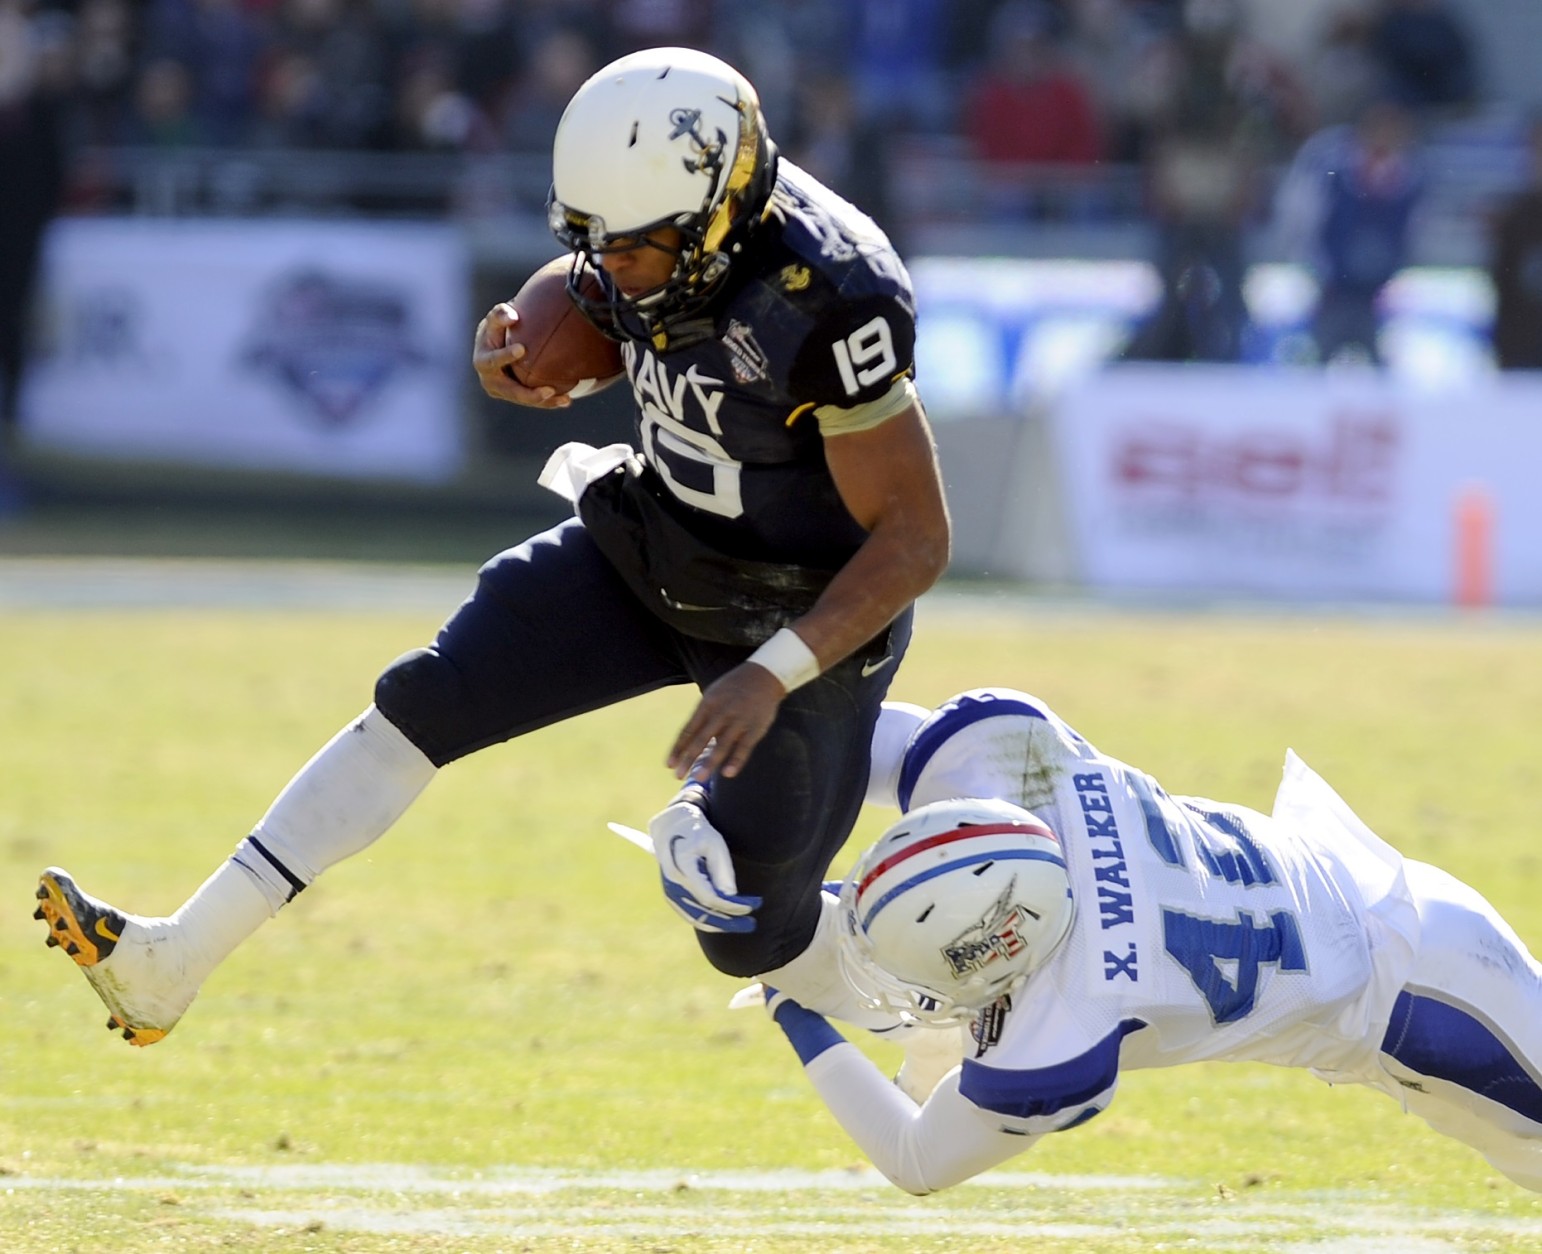 Navy Midshipmen quarterback Keenan Reynolds (19) runs through a tackle attempt by Middle Tennessee Blue Raiders safety Xavier Walker (42) in the first half Armed Forces Bowl NCAA college football game, Monday, Dec. 30, 2013, in Fort Worth. (AP Photo/Matt Strasen)